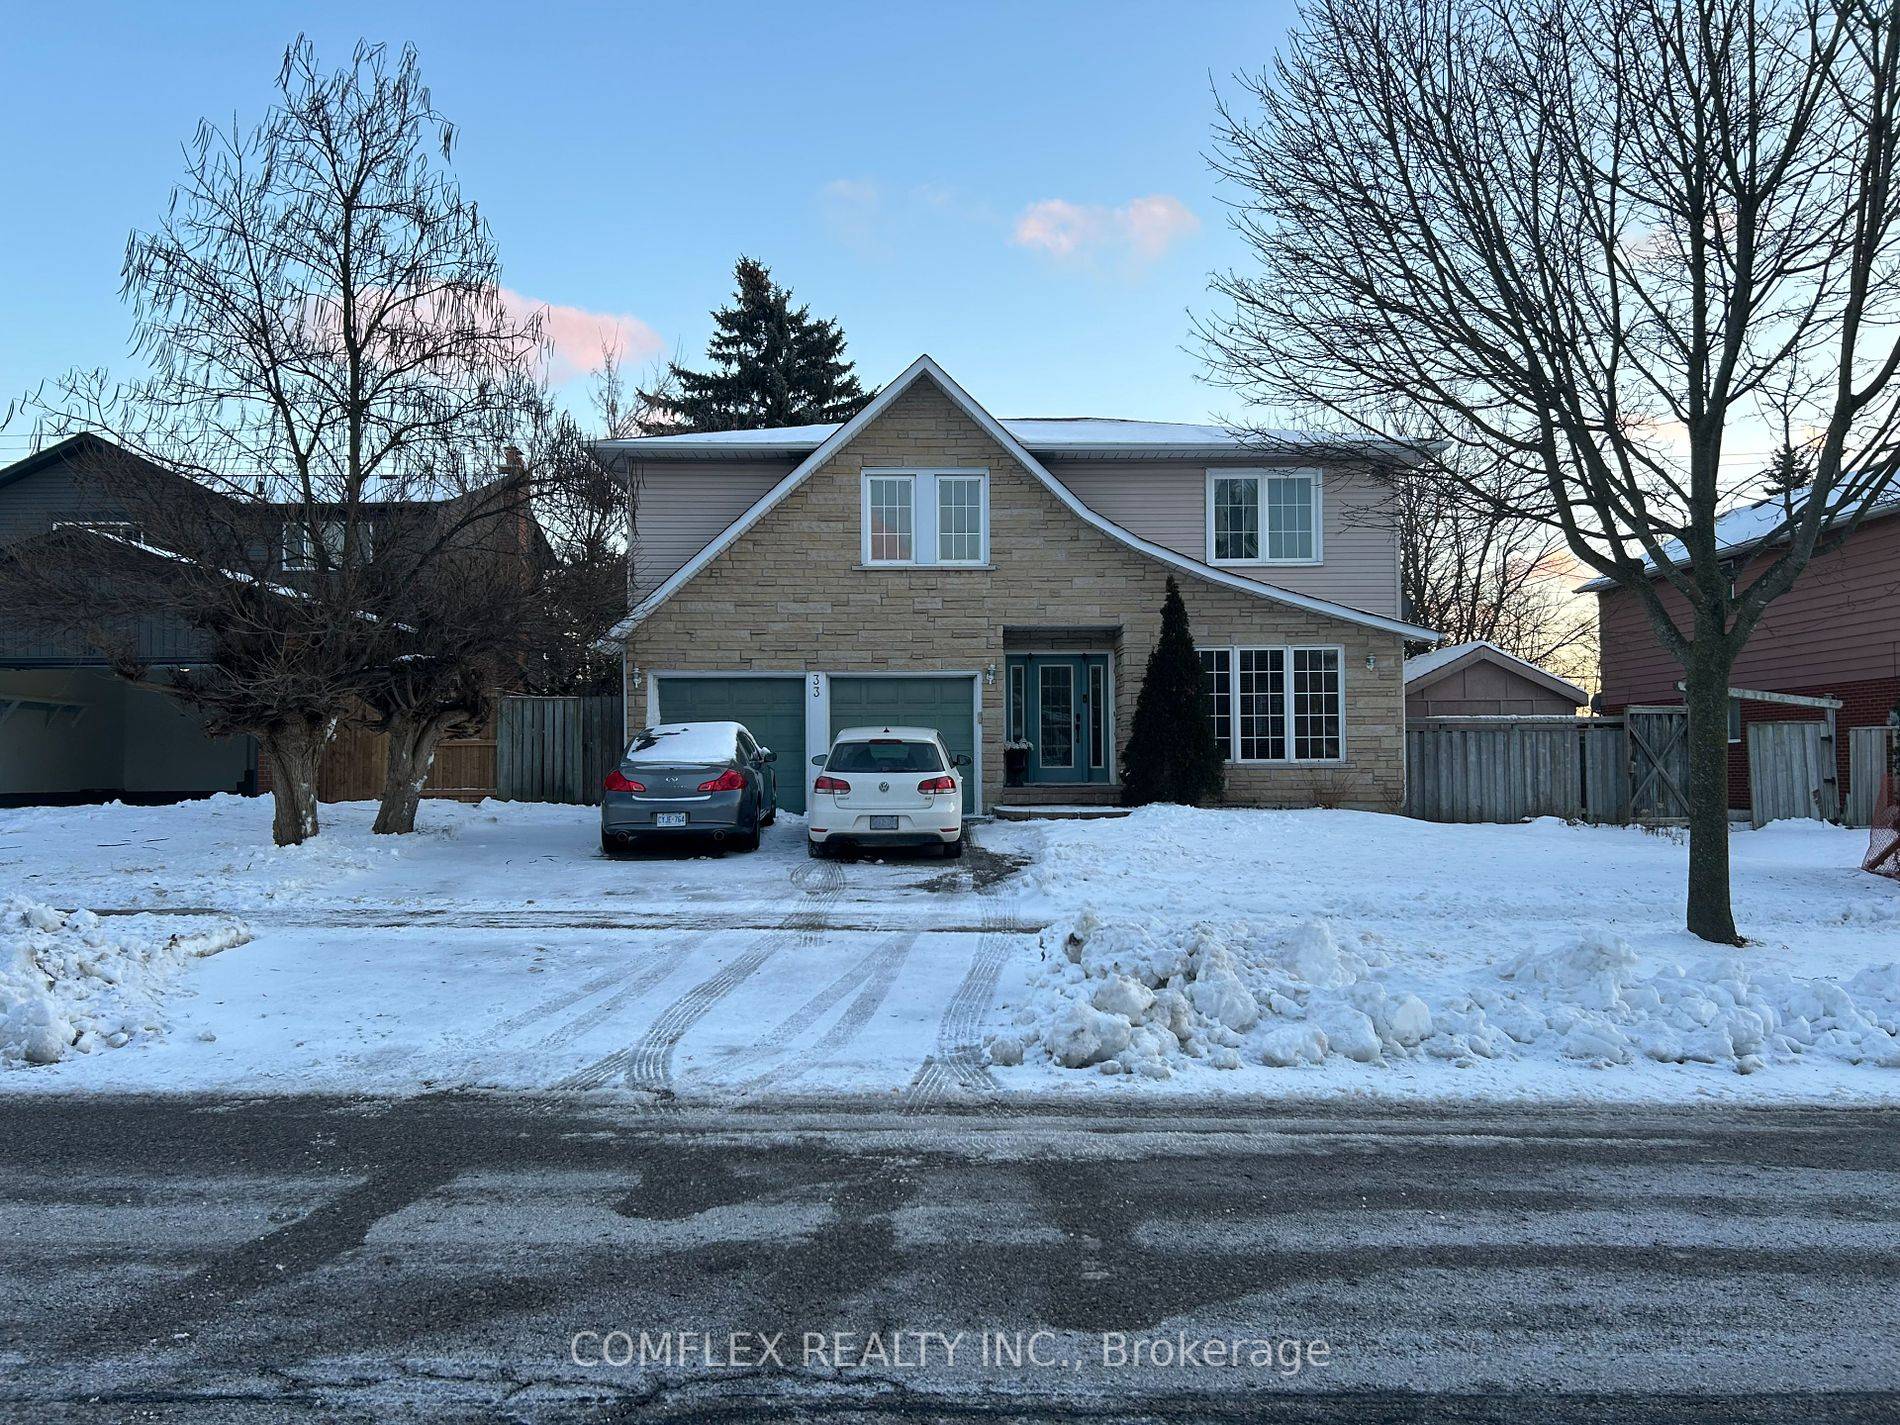 Beautiful executive home in peaceful Markham Village, great for employees at nearby Markham Stouffville hospital and nearby amenities, spacious with furniture, appliances and tv included in rent.